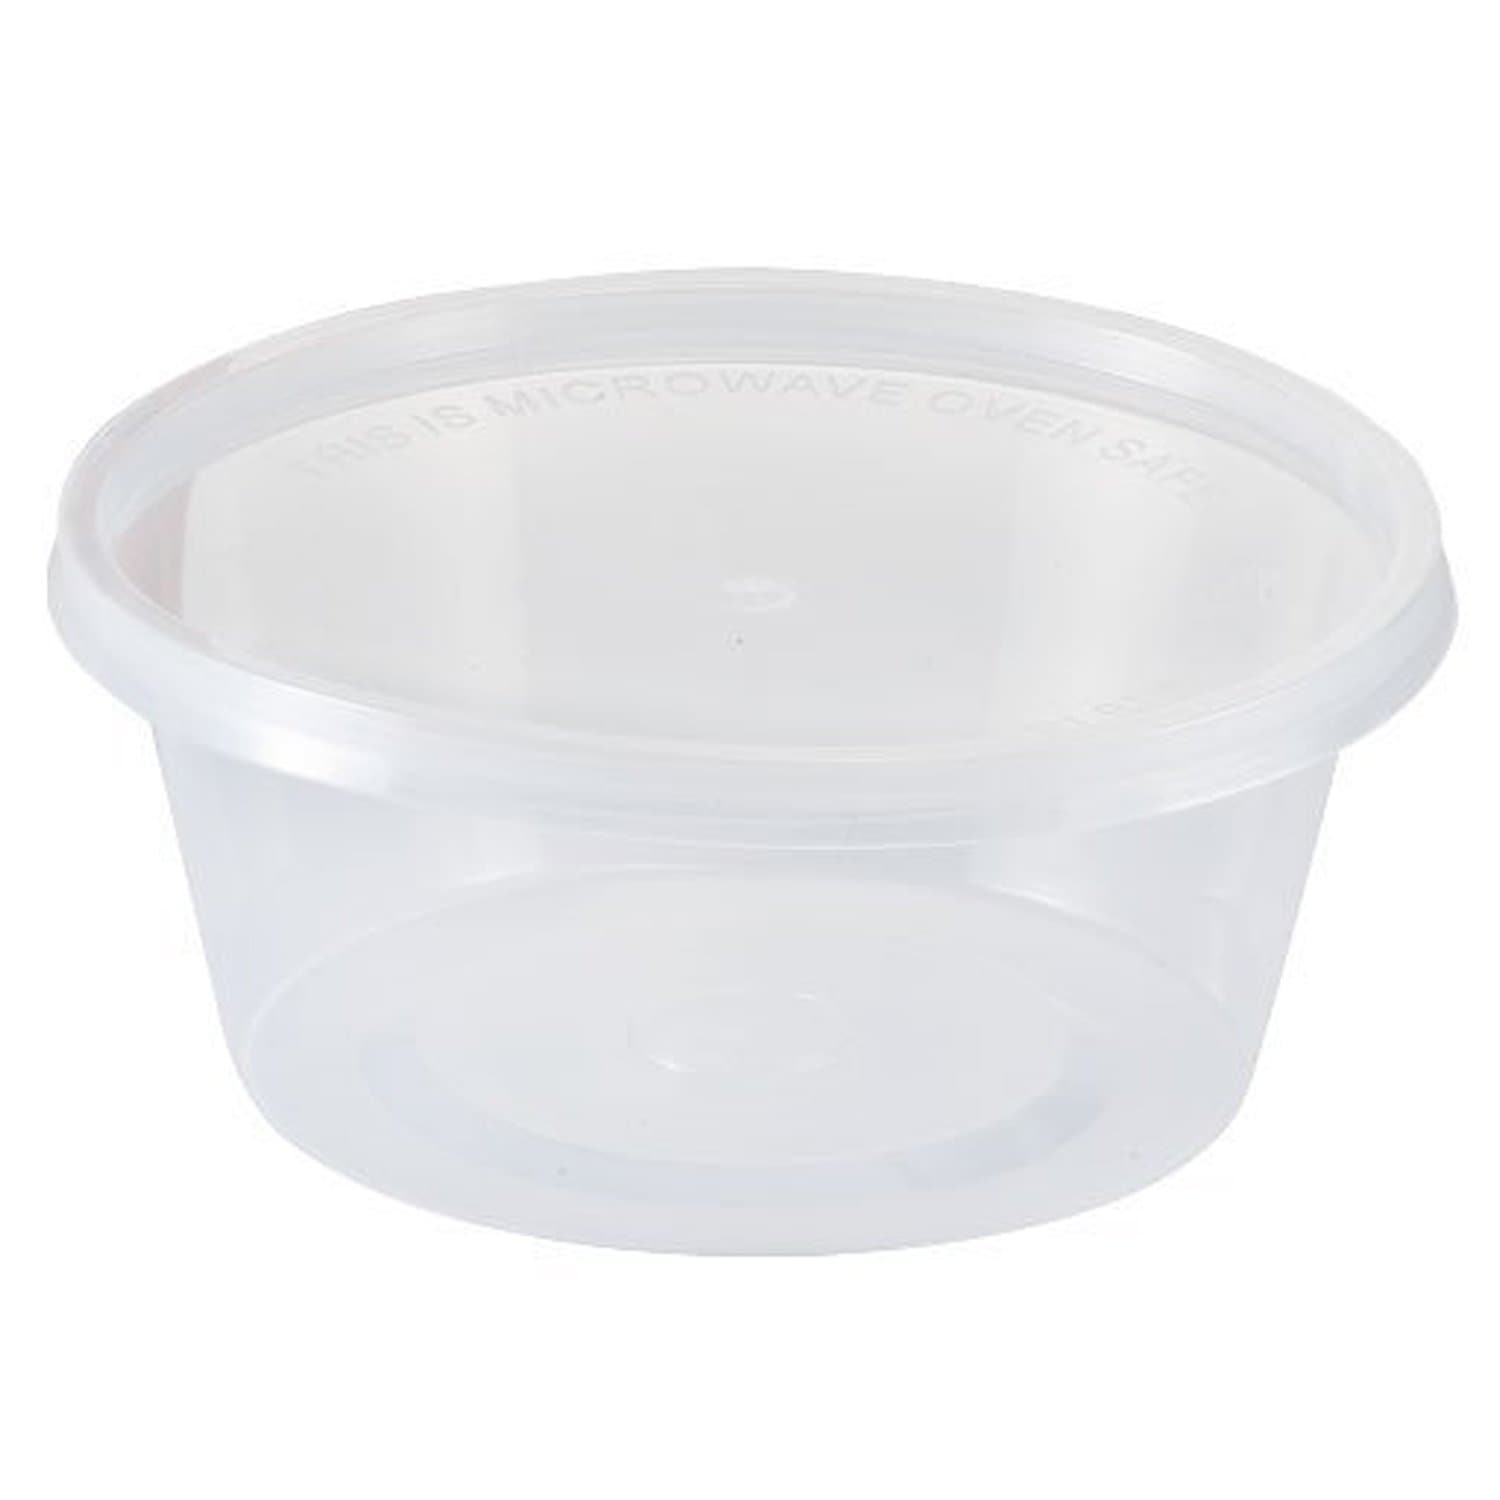 Nicole Home Collection 02050 Food Storage Round Container with Lid, Clear, 10 oz - 7 count